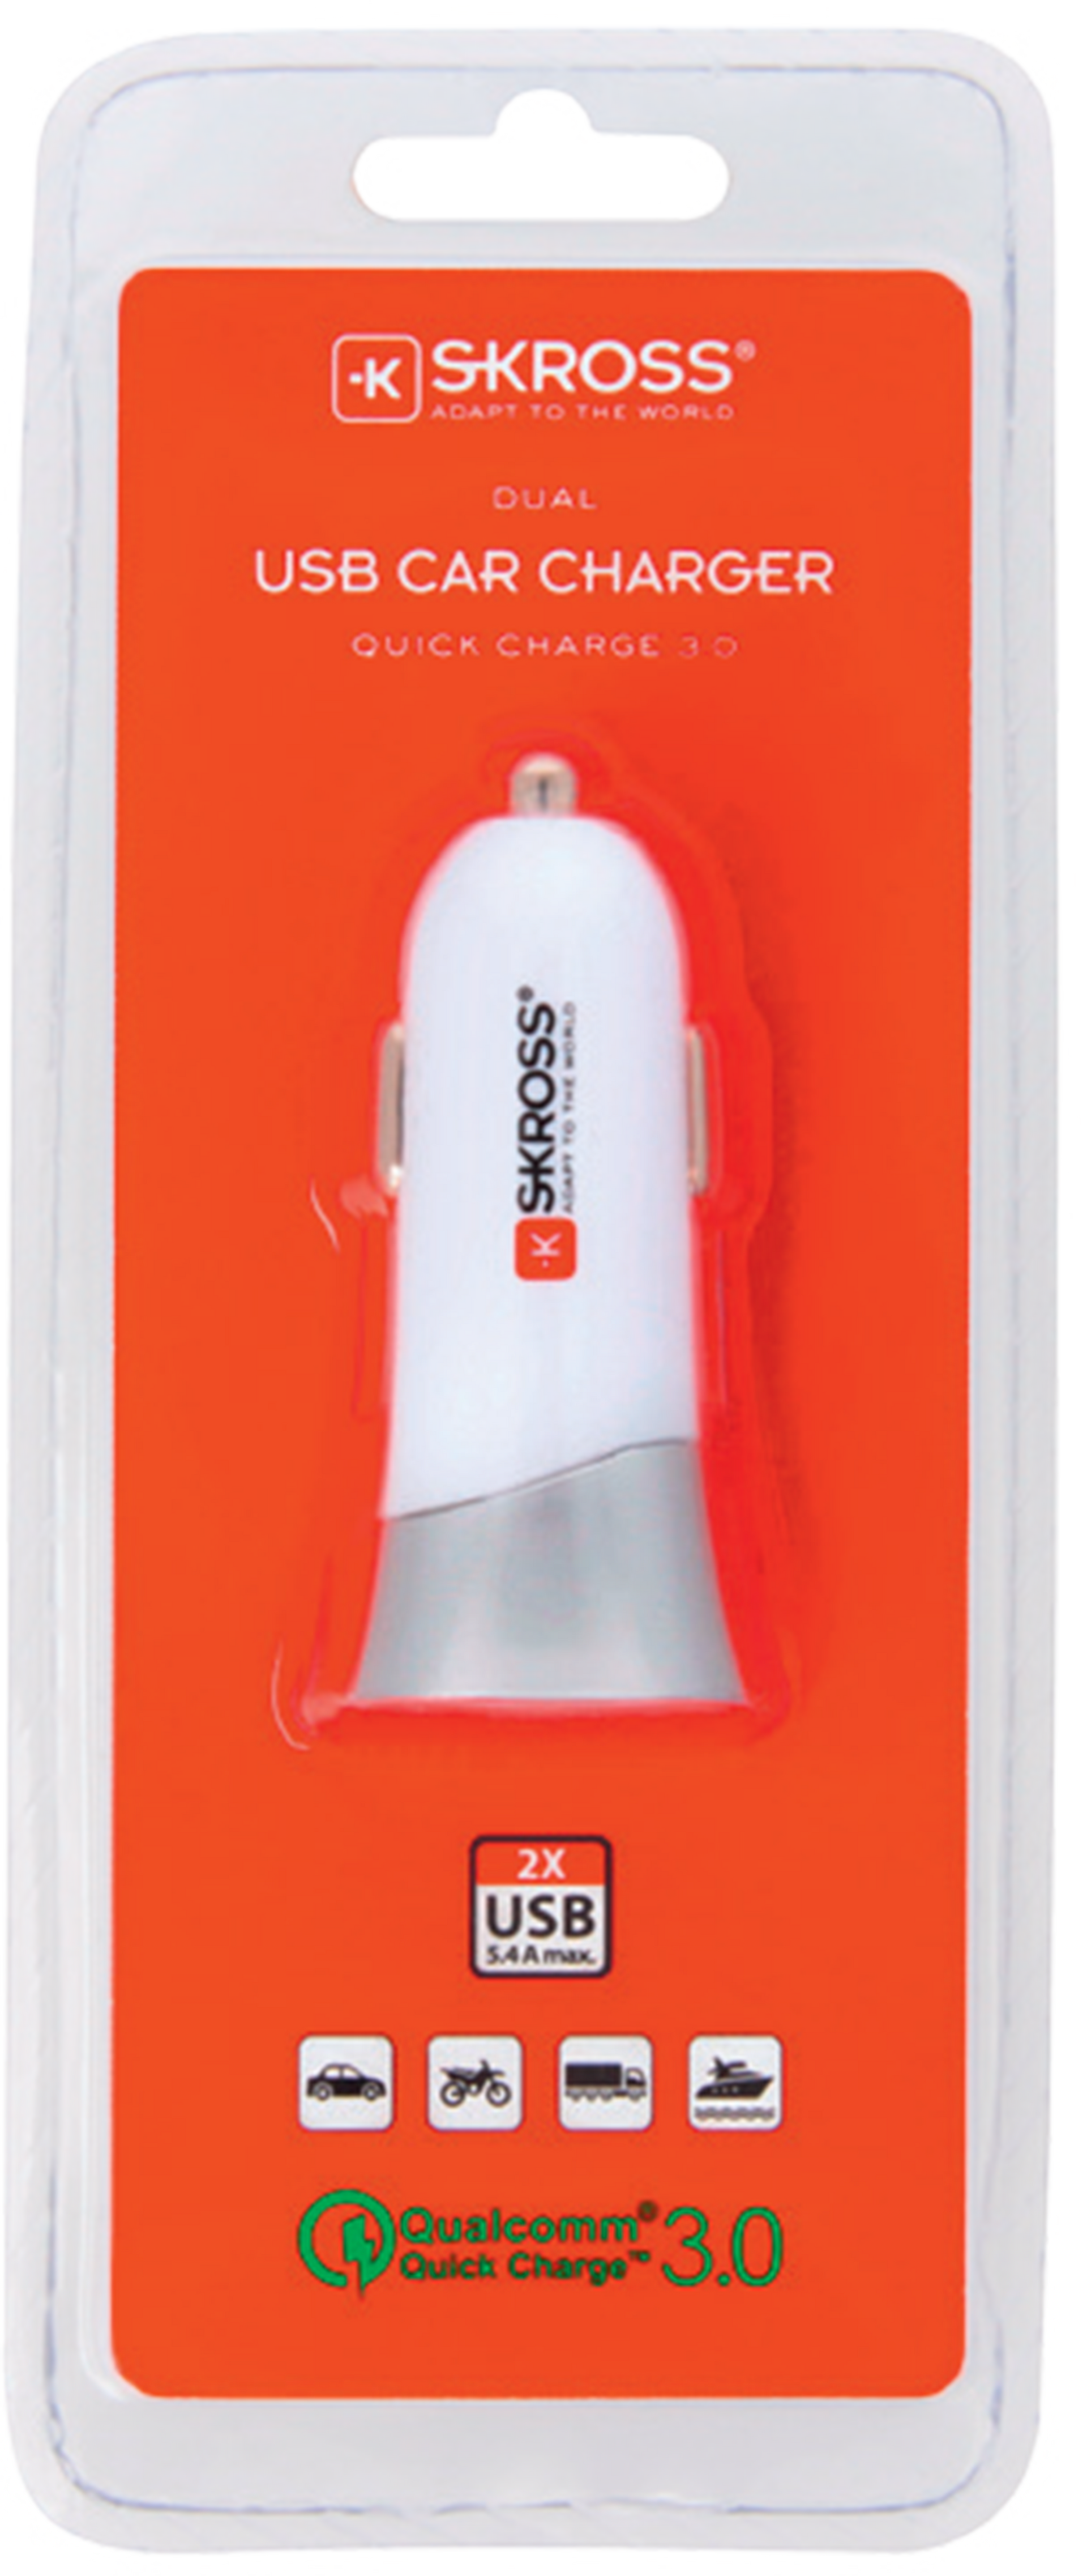 Skross Car USB Charger. Dual USB Car Charger - Quick Charge 3.0 Packaging